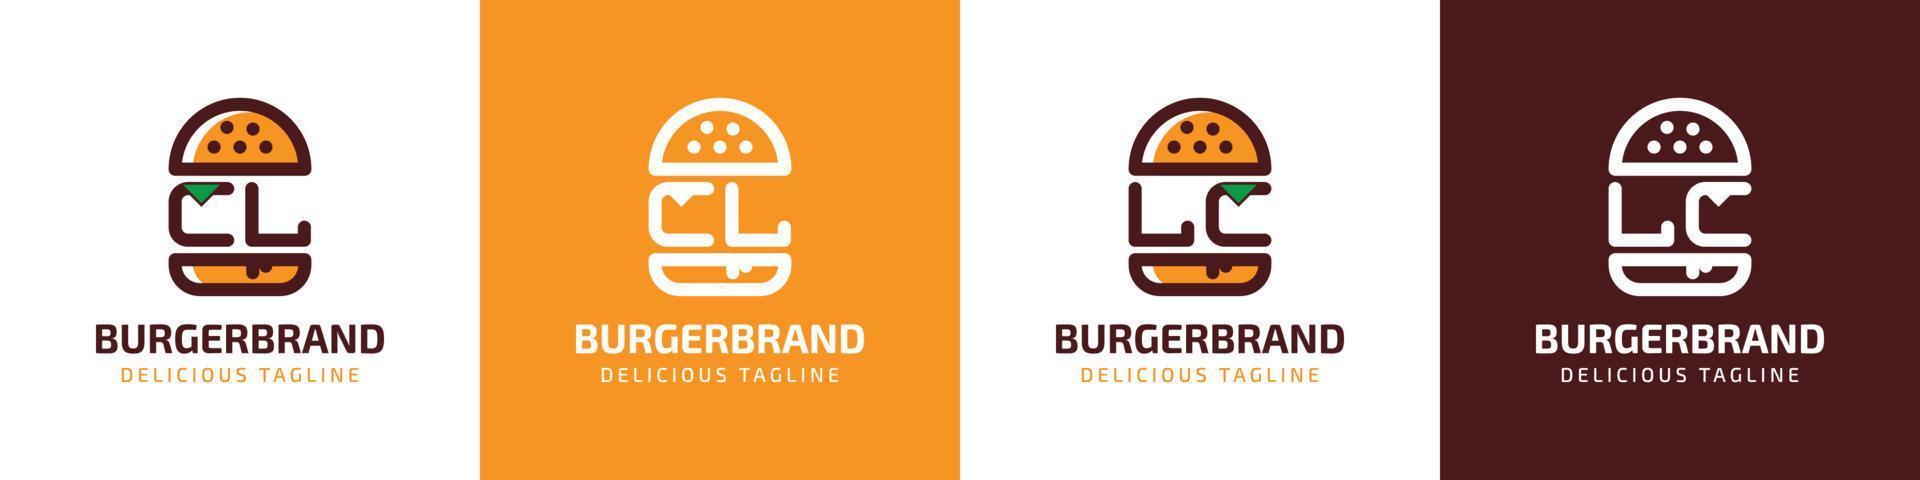 Letter CL and LC Burger Logo, suitable for any business related to burger with CL or LC initials. vector